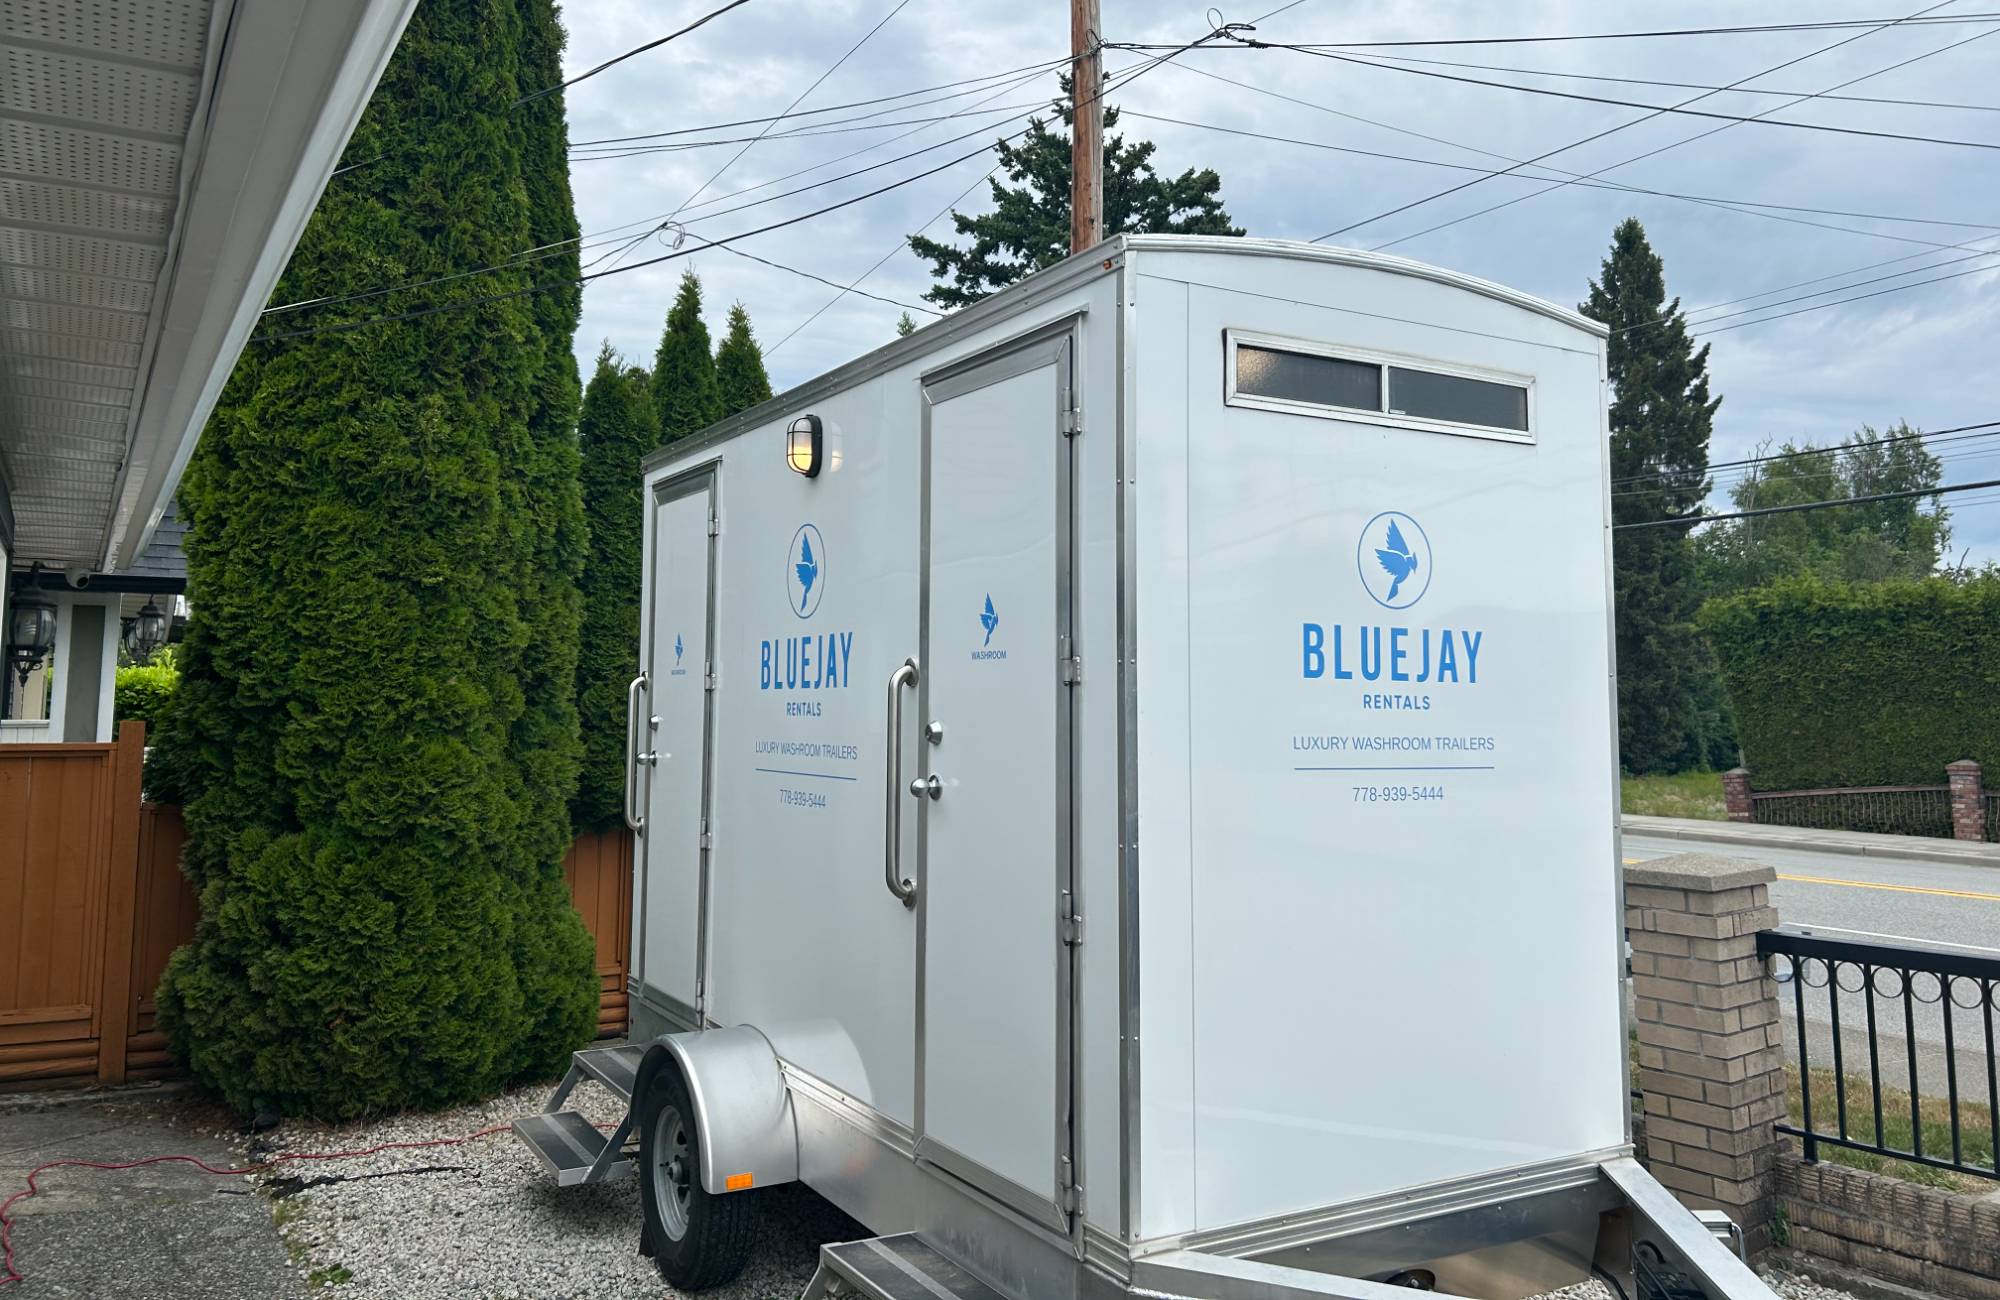 Keeping it Classy – The Trend of High-End Washroom Trailers at Weddings